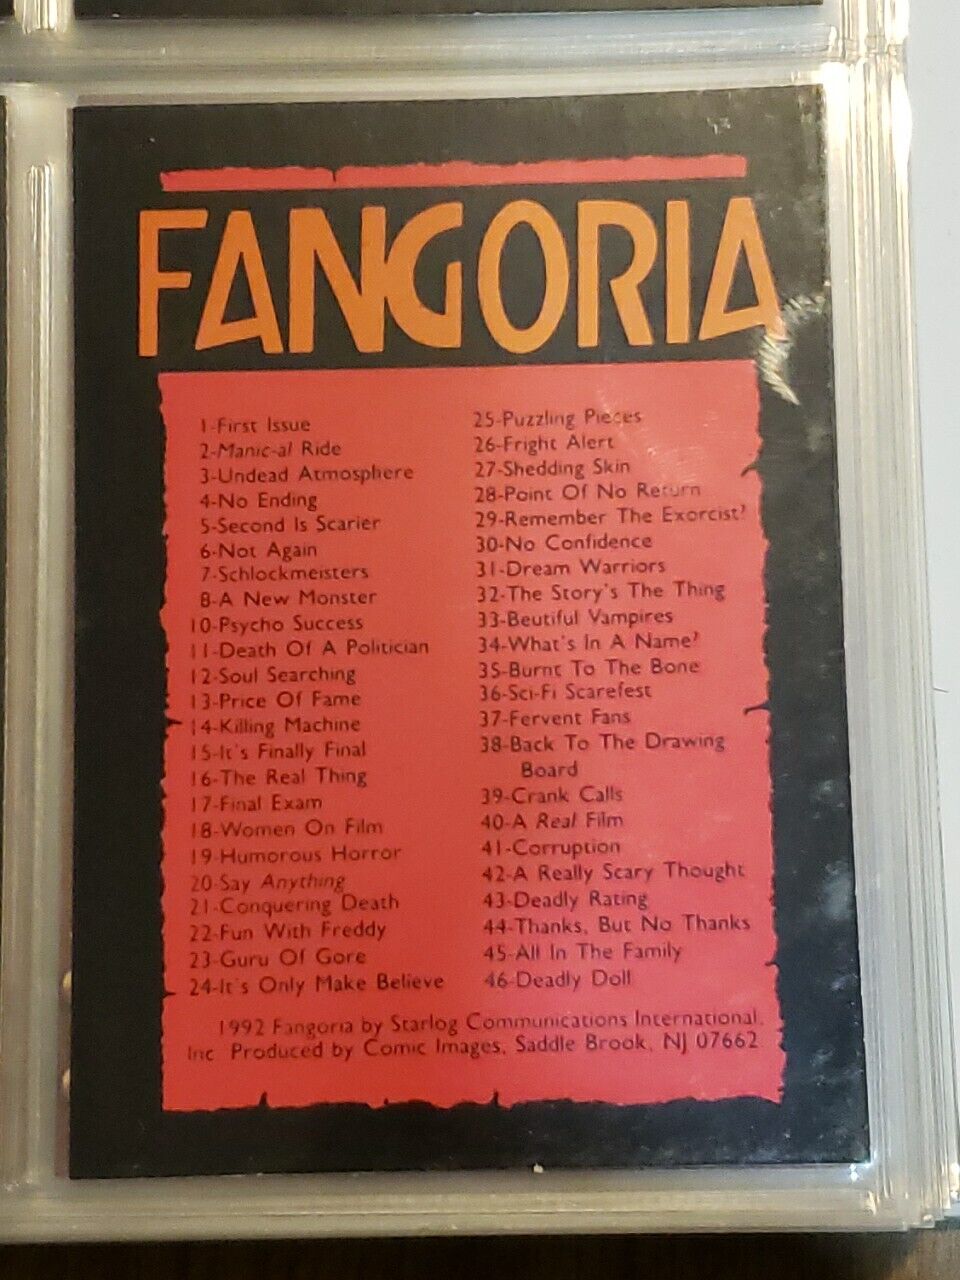 Fangoria 90 Trading Card Set In Plastic Sleeves '1992 Comic Images 